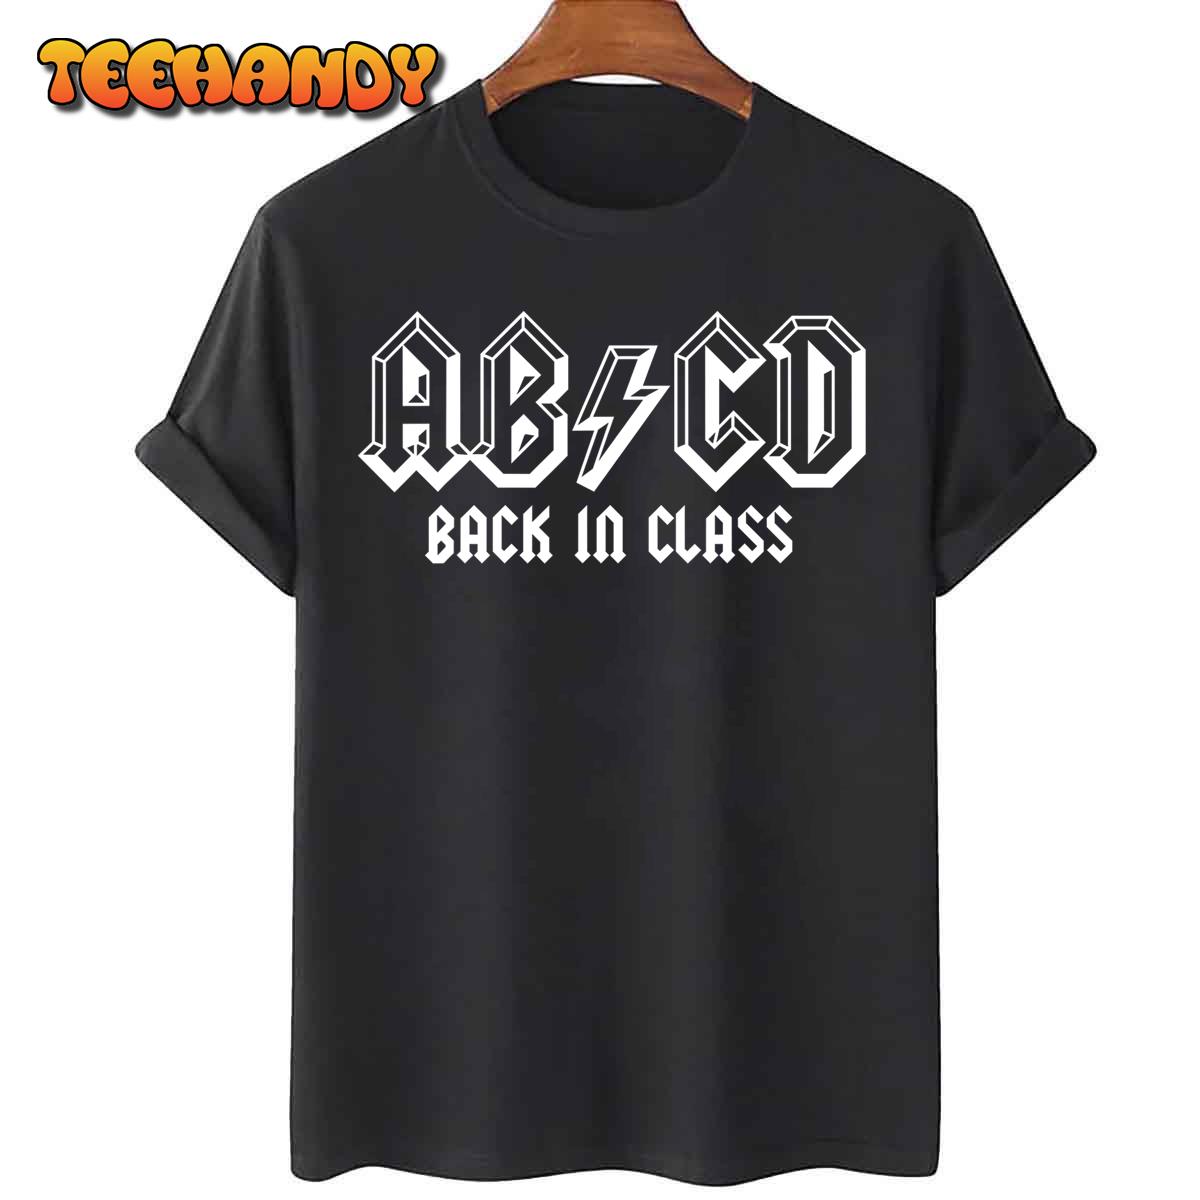 ABCD Rocks Back To School Back In Class Funny Teacher T-Shirt